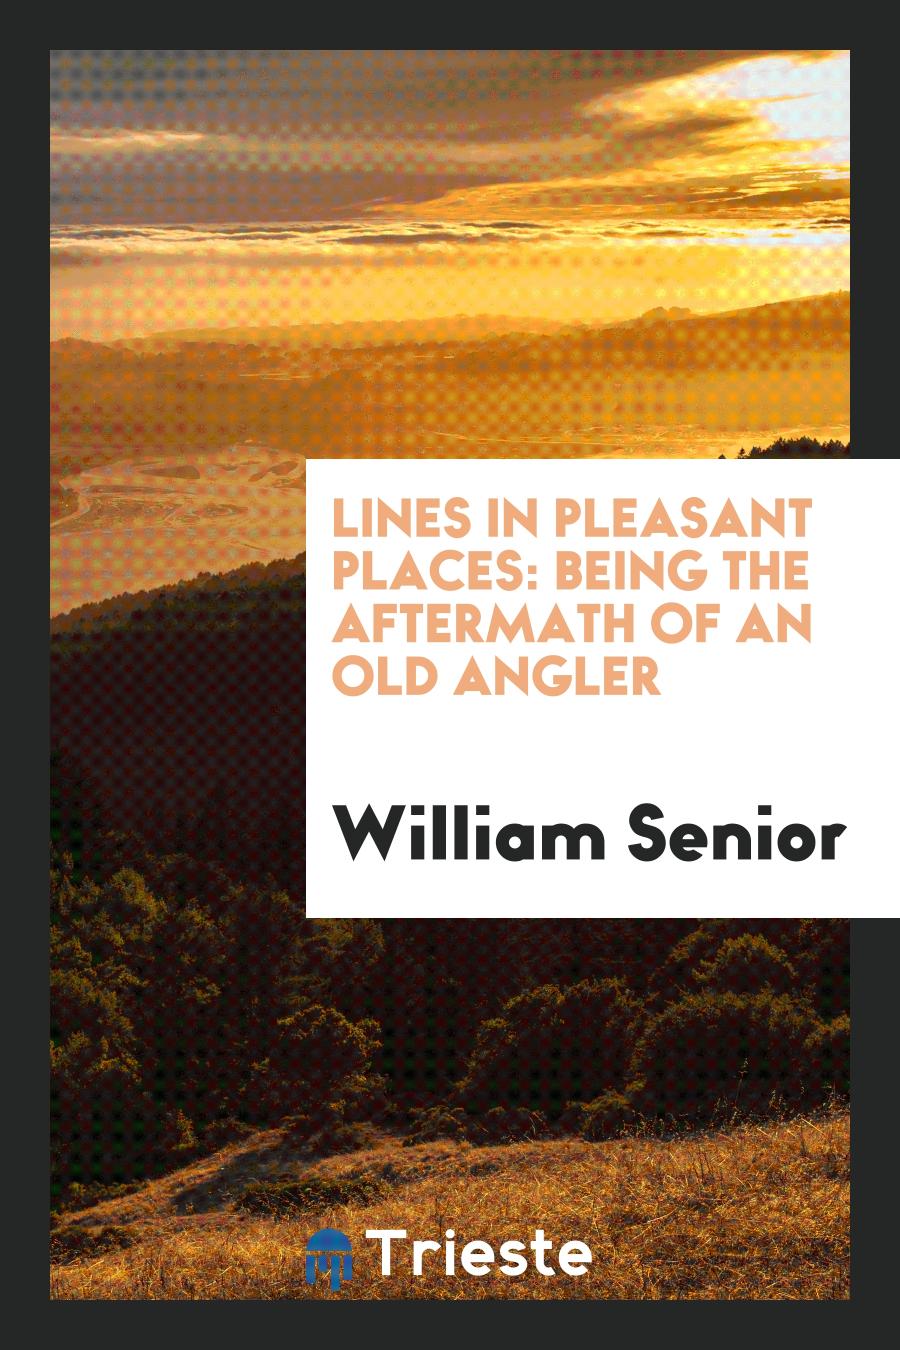 Lines in Pleasant Places: Being the Aftermath of an Old Angler